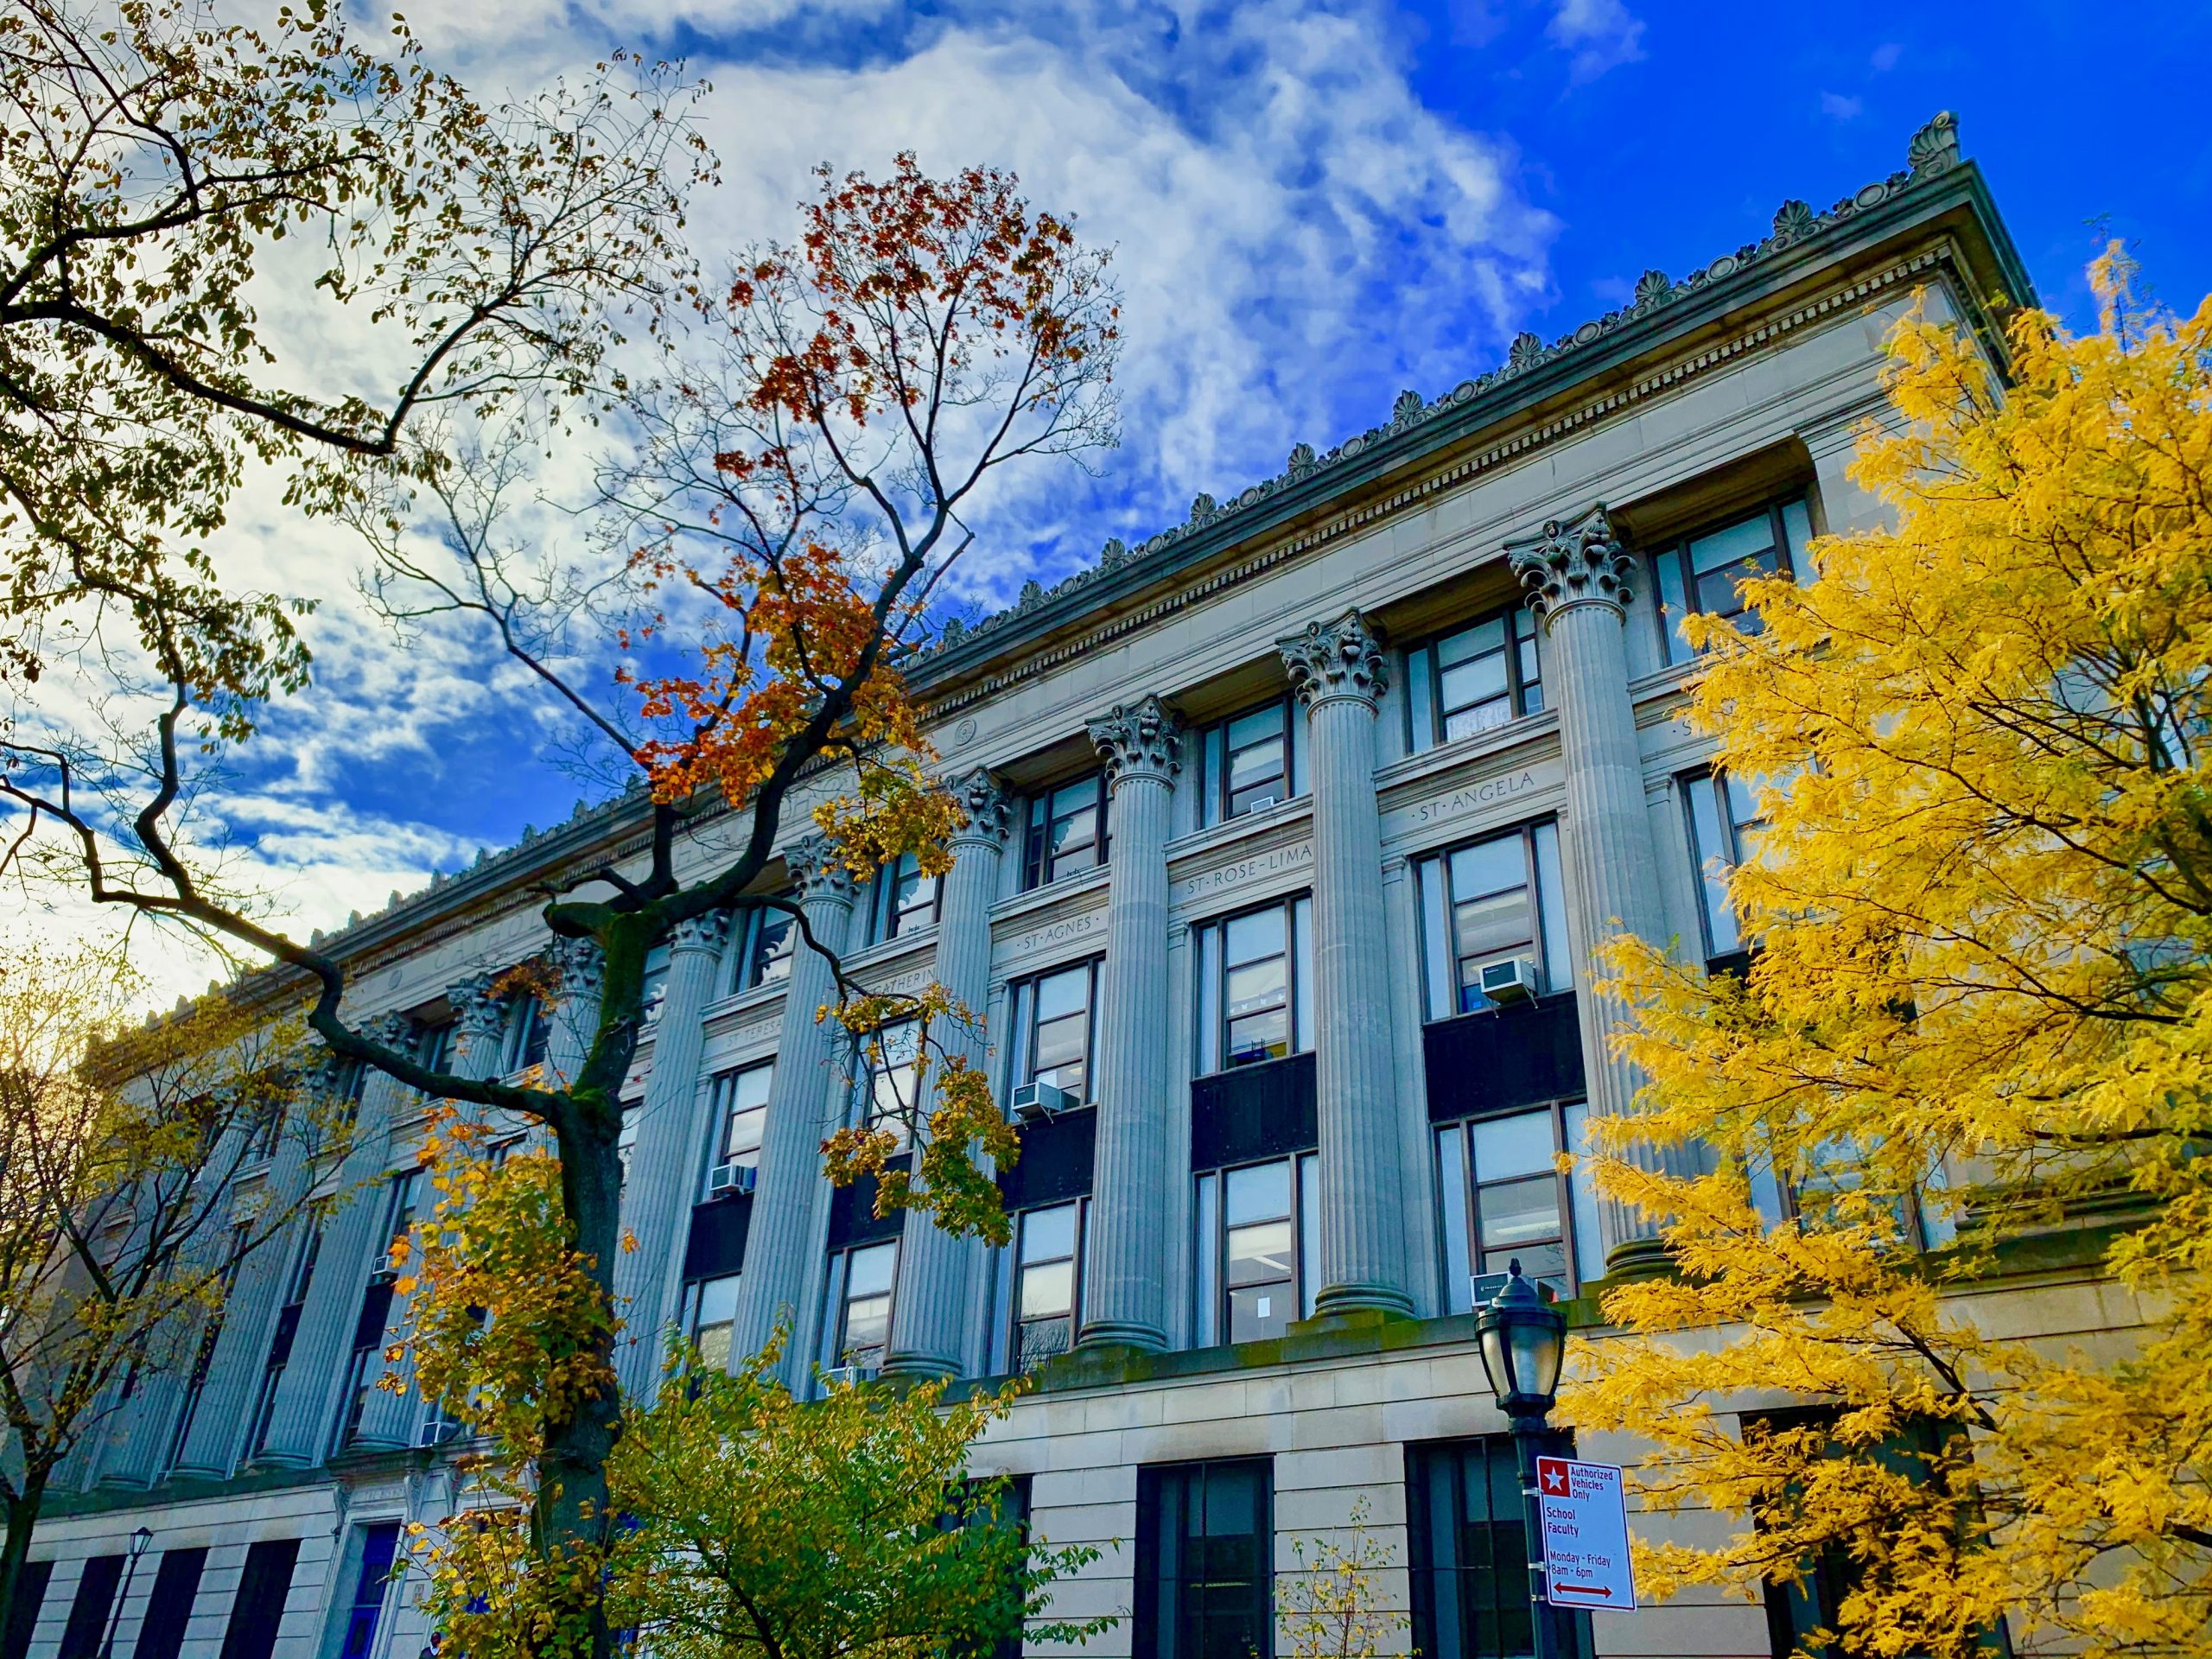 A view of the front of the school with two trees on a Fall day is shown. One tree has lost most leaves while the other trees’ leaves are all yellow. The angle of the shot is looking up as we see many pillars of the building’s architectural style and a partly cloudy blue sky.